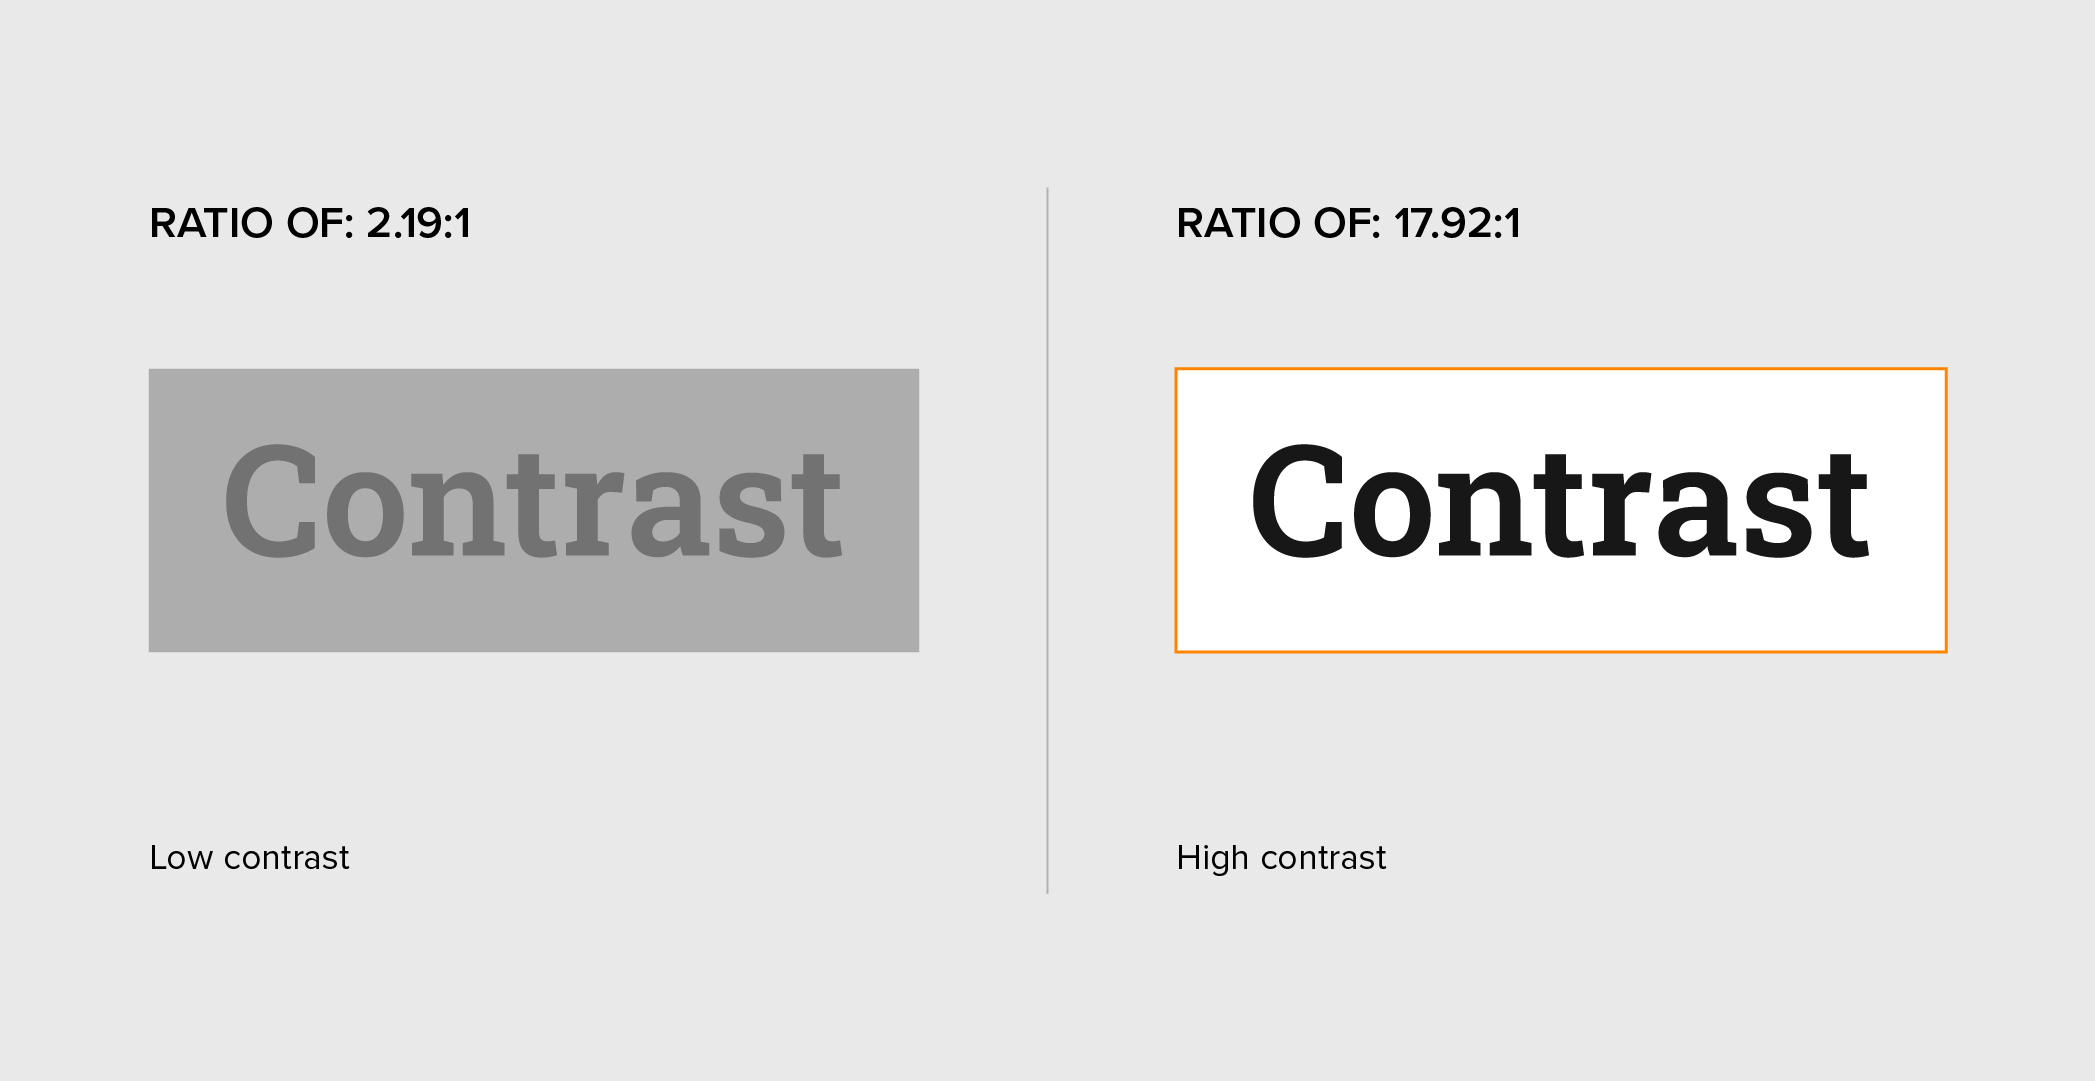 An example of low contrast (2.19:1) vs high contrast (17.92:1) typography.